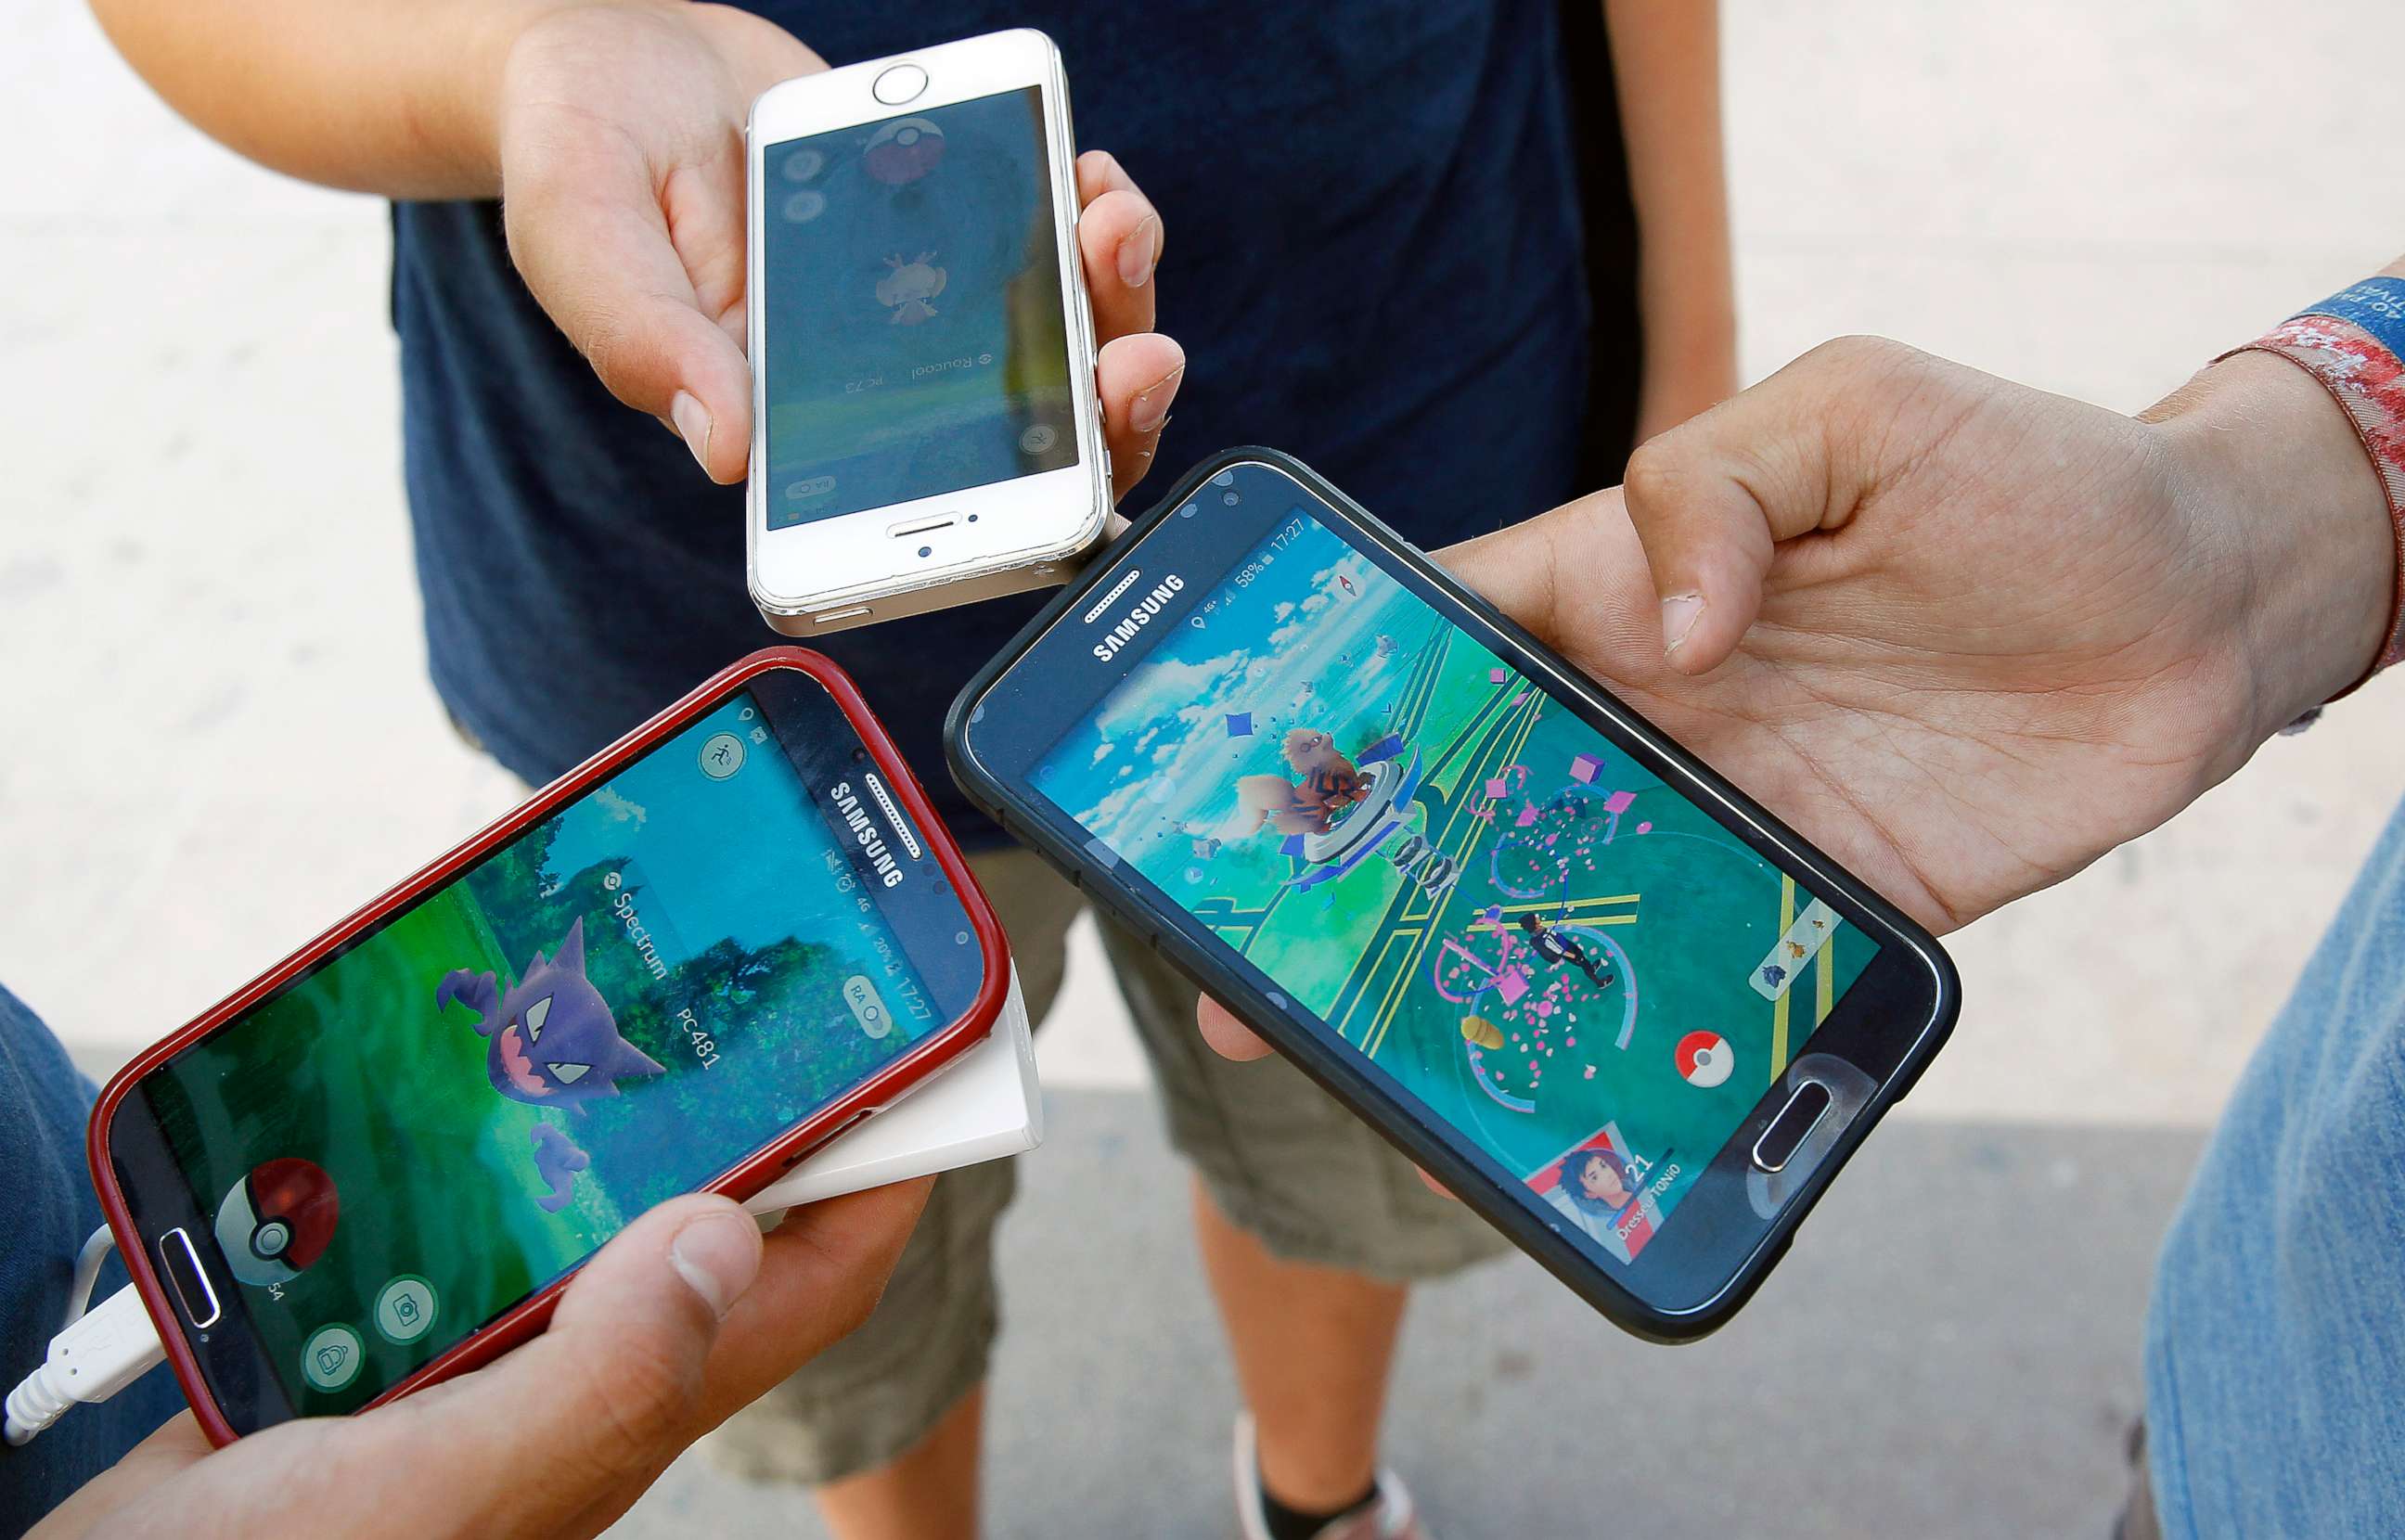 PHOTO: Kids show the screen of their smartphone with Nintendo Co.'s Pokemon Go augmented-reality game at the Trocadero in front of the Eiffel tower on September 8, 2016 in Paris, France.